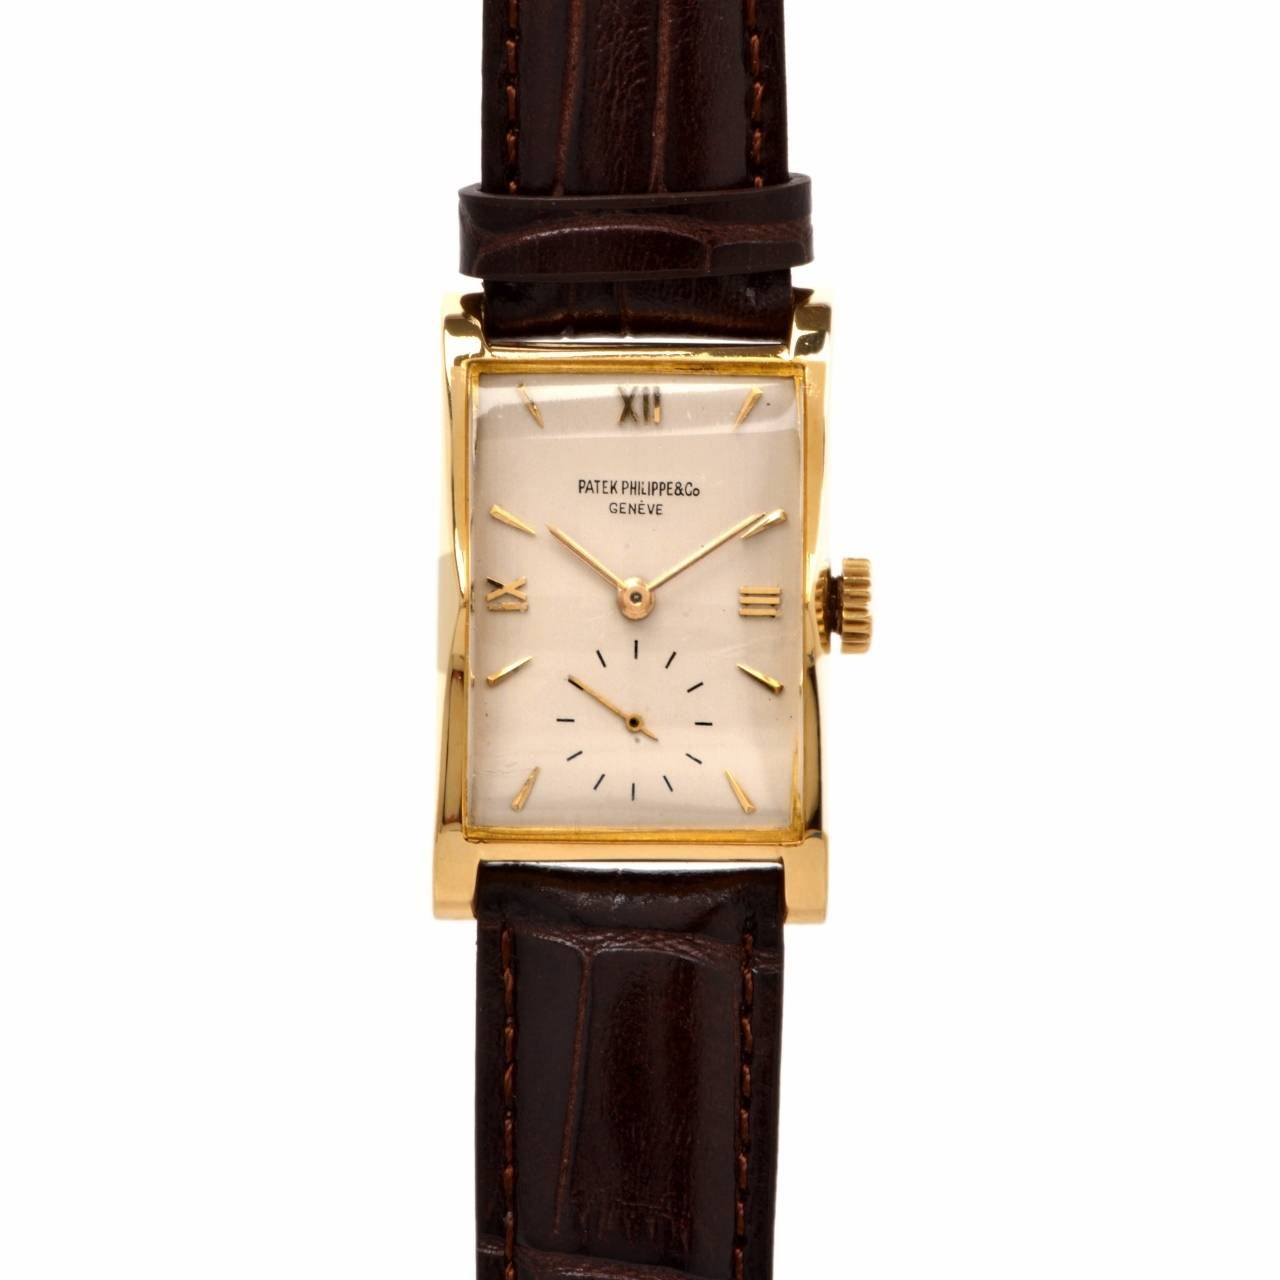 Patek Philippe reference number 1588J  Manual winding  Yellow Gold case  on Brown Strap, small  seconds, case, dial and movement signed patek Phillipe .

Movement: Manual winding , Caliber 9L-90 , 18 jewel  , Movement number 838.200, Frequency